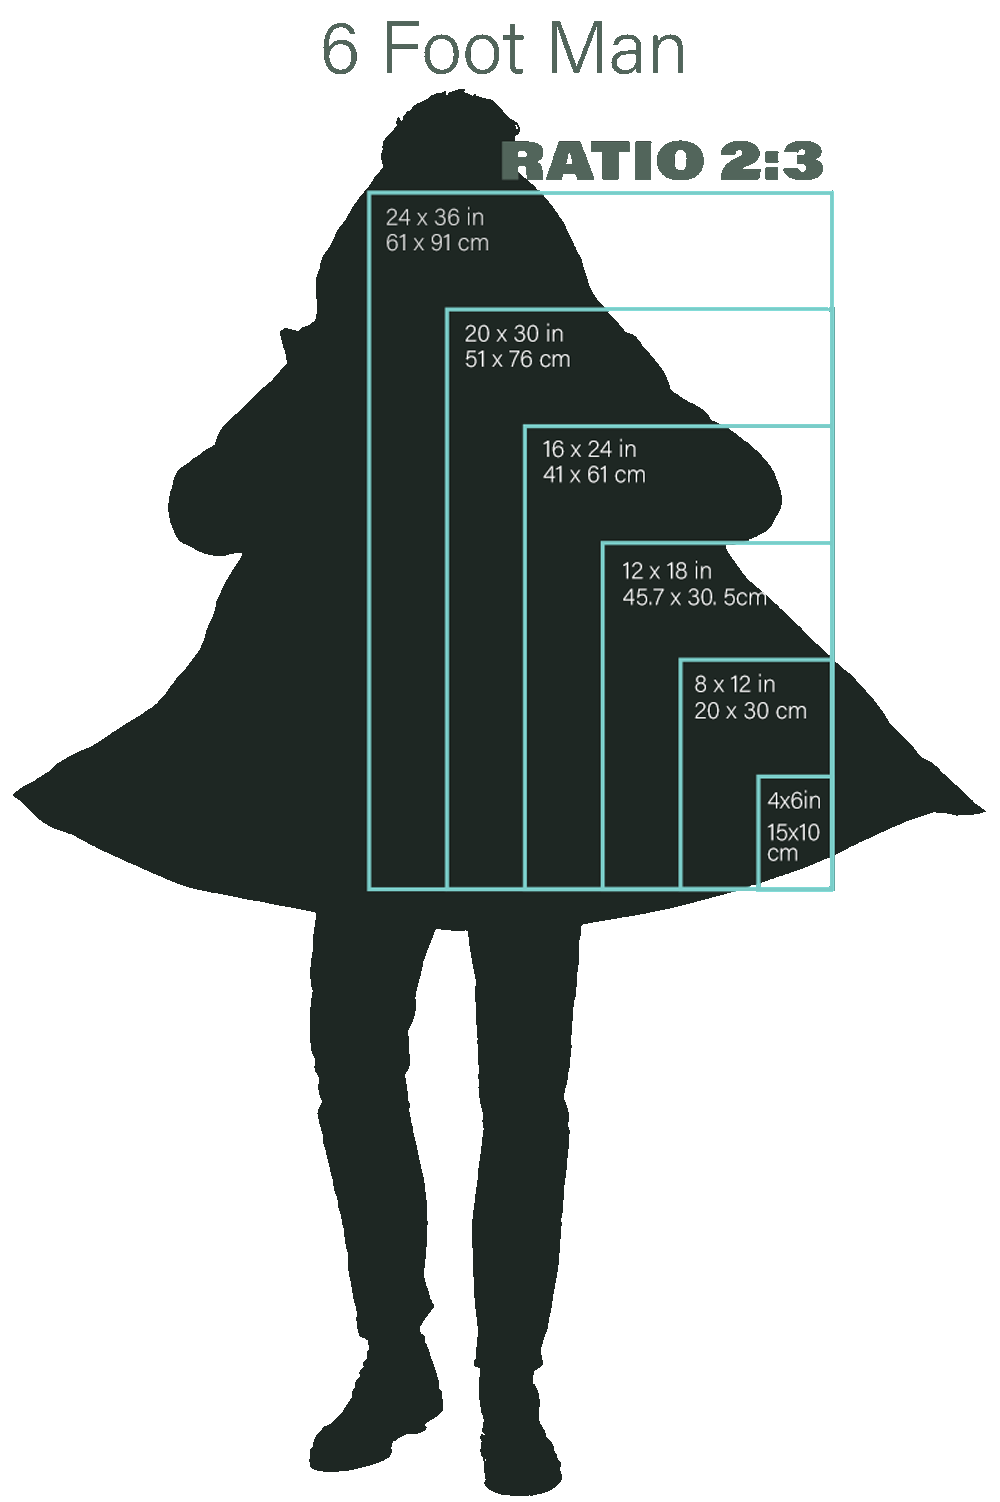 graphic showing print sizes in a 2:3 ratio compared to the height of a six foot man